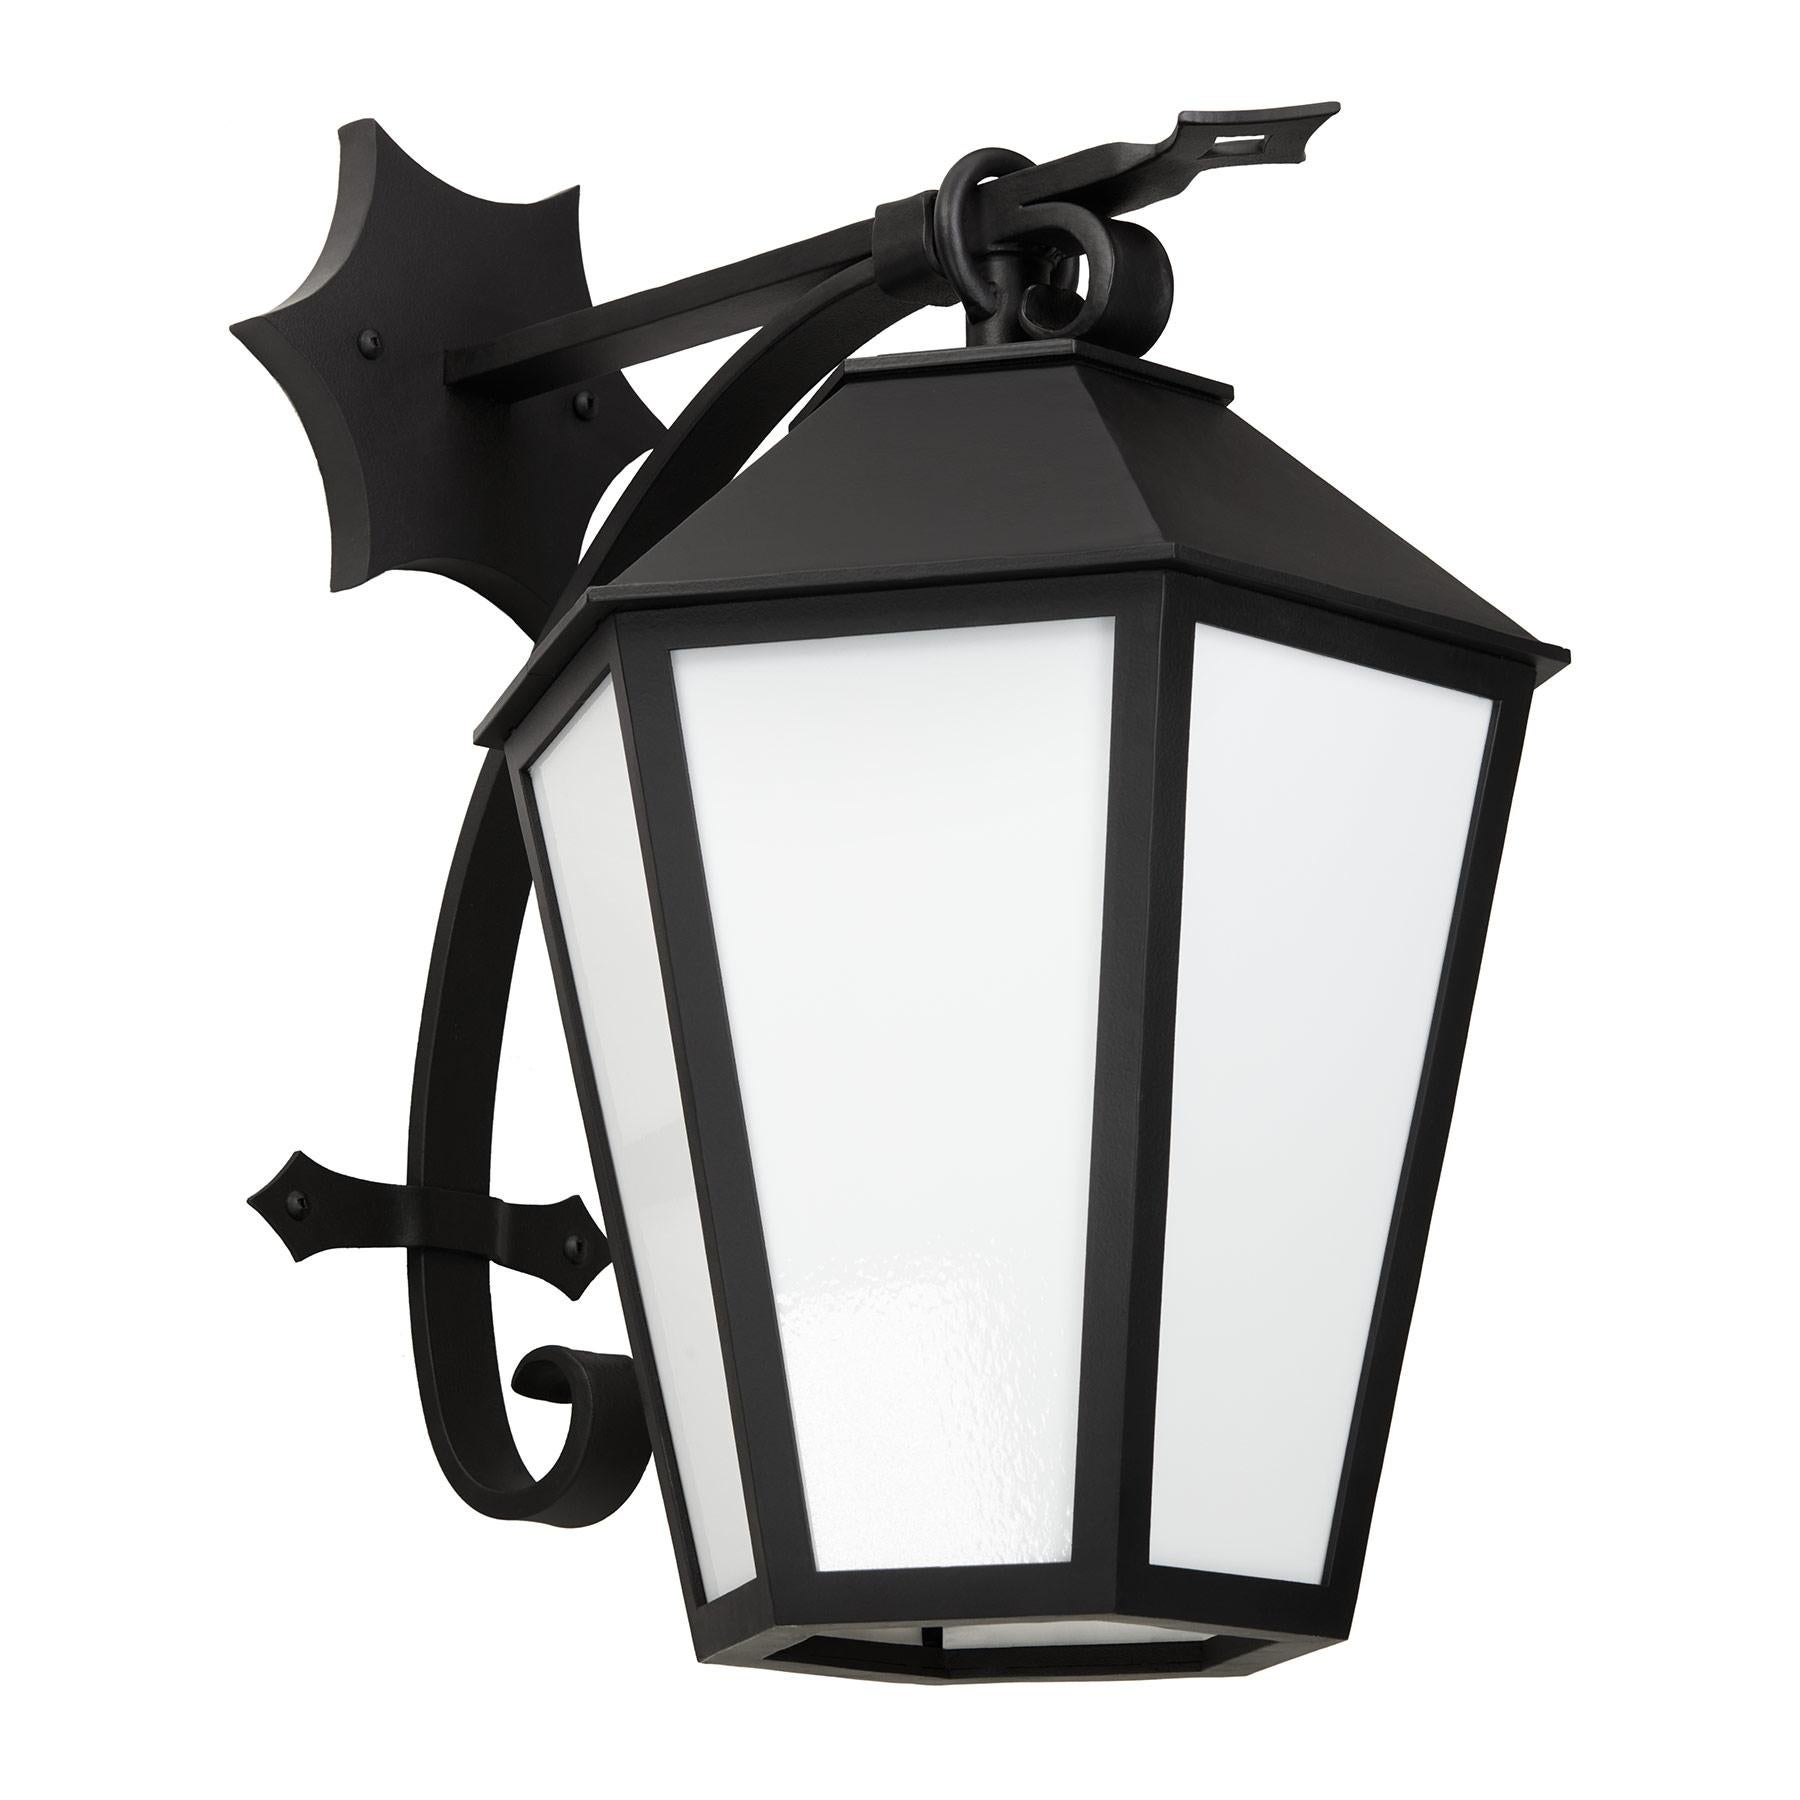 Spanish Colonial Spanish Style Wrought Iron Exterior Lantern Wall Mount (Dark Sky Compliant) For Sale